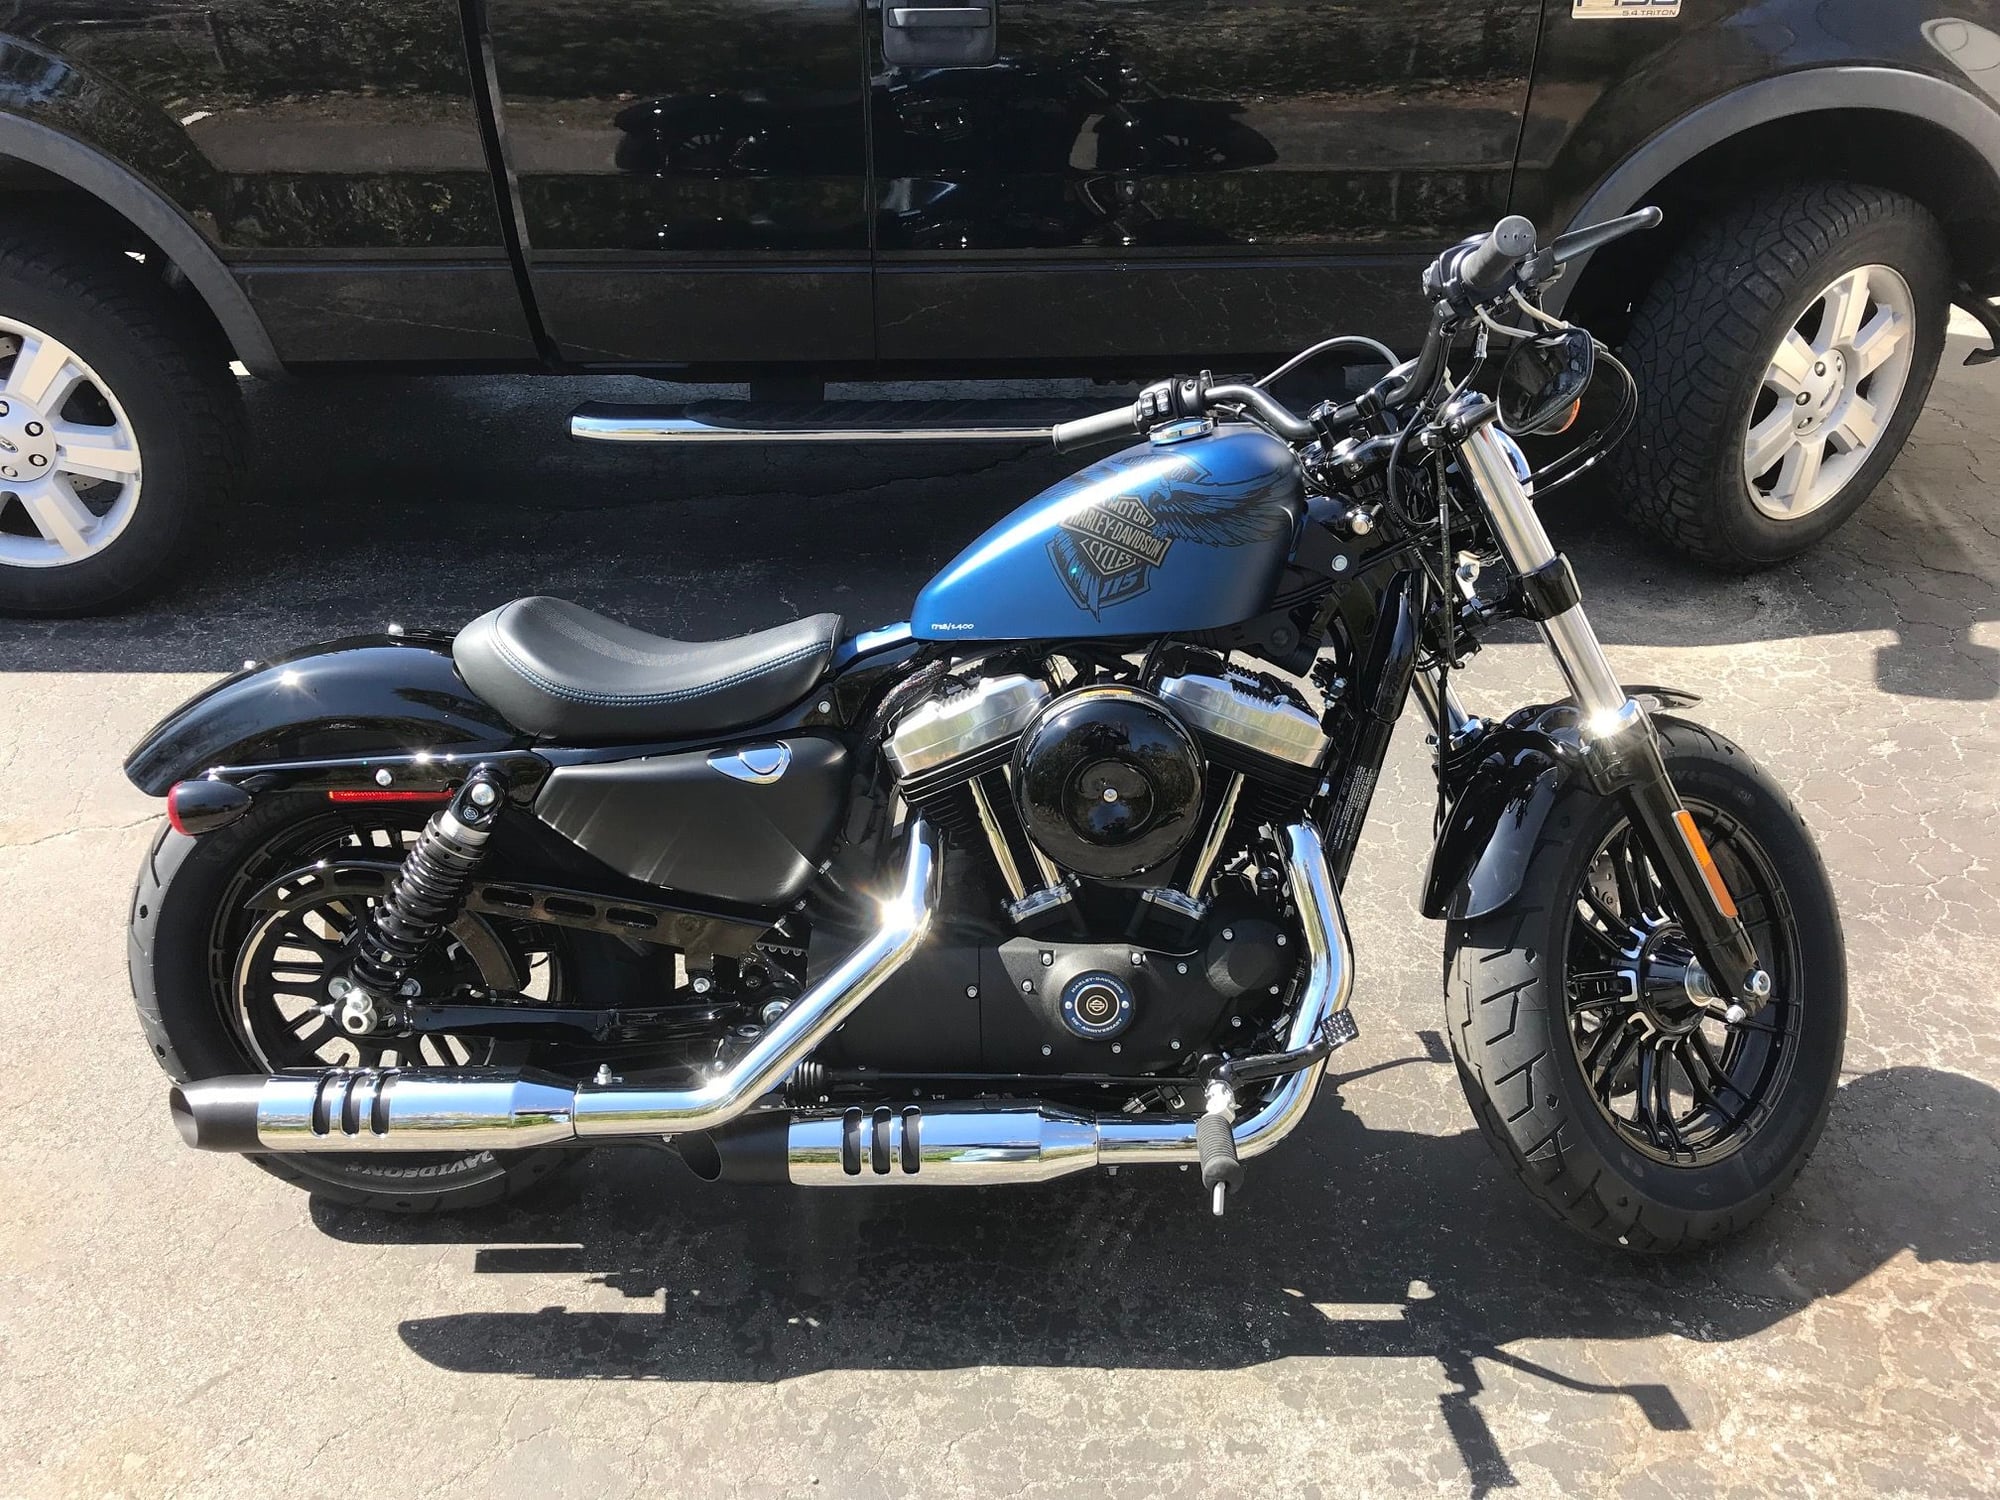 2018 forty eight, exhaust ? - Harley Davidson Forums